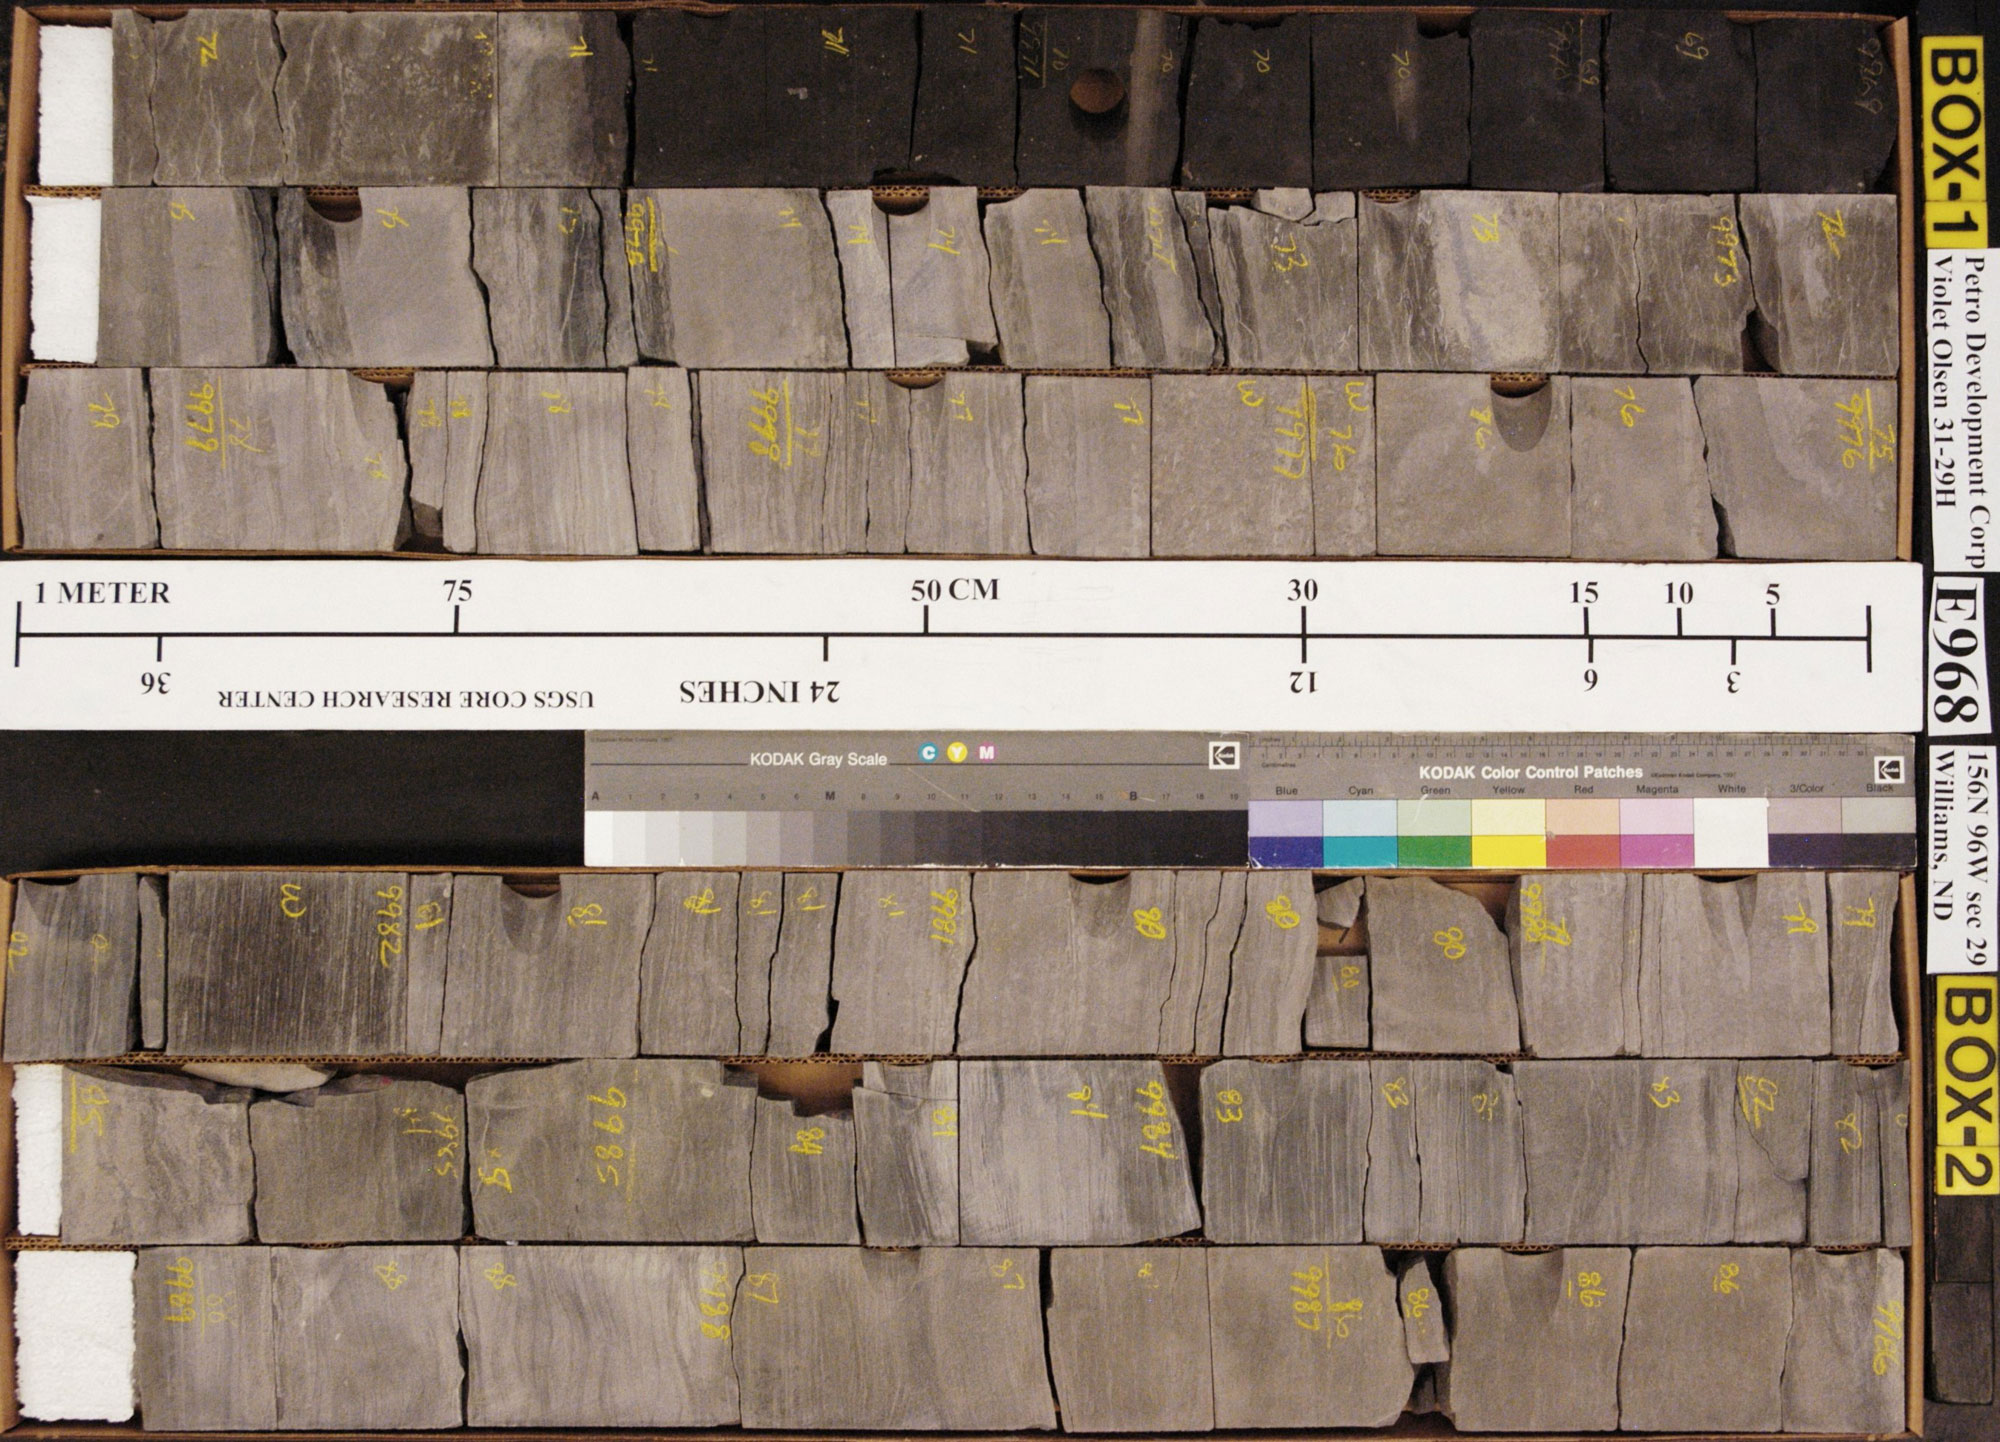 Photograph of segments of a core drilled through the Bakken Formation. The photo shows two boxes, each containing three elongated-rectangular segments of rock core. The rock varies from very dark gray to light gray in color. Each core segment is about 1 meter (a little more than 1 yard) long.